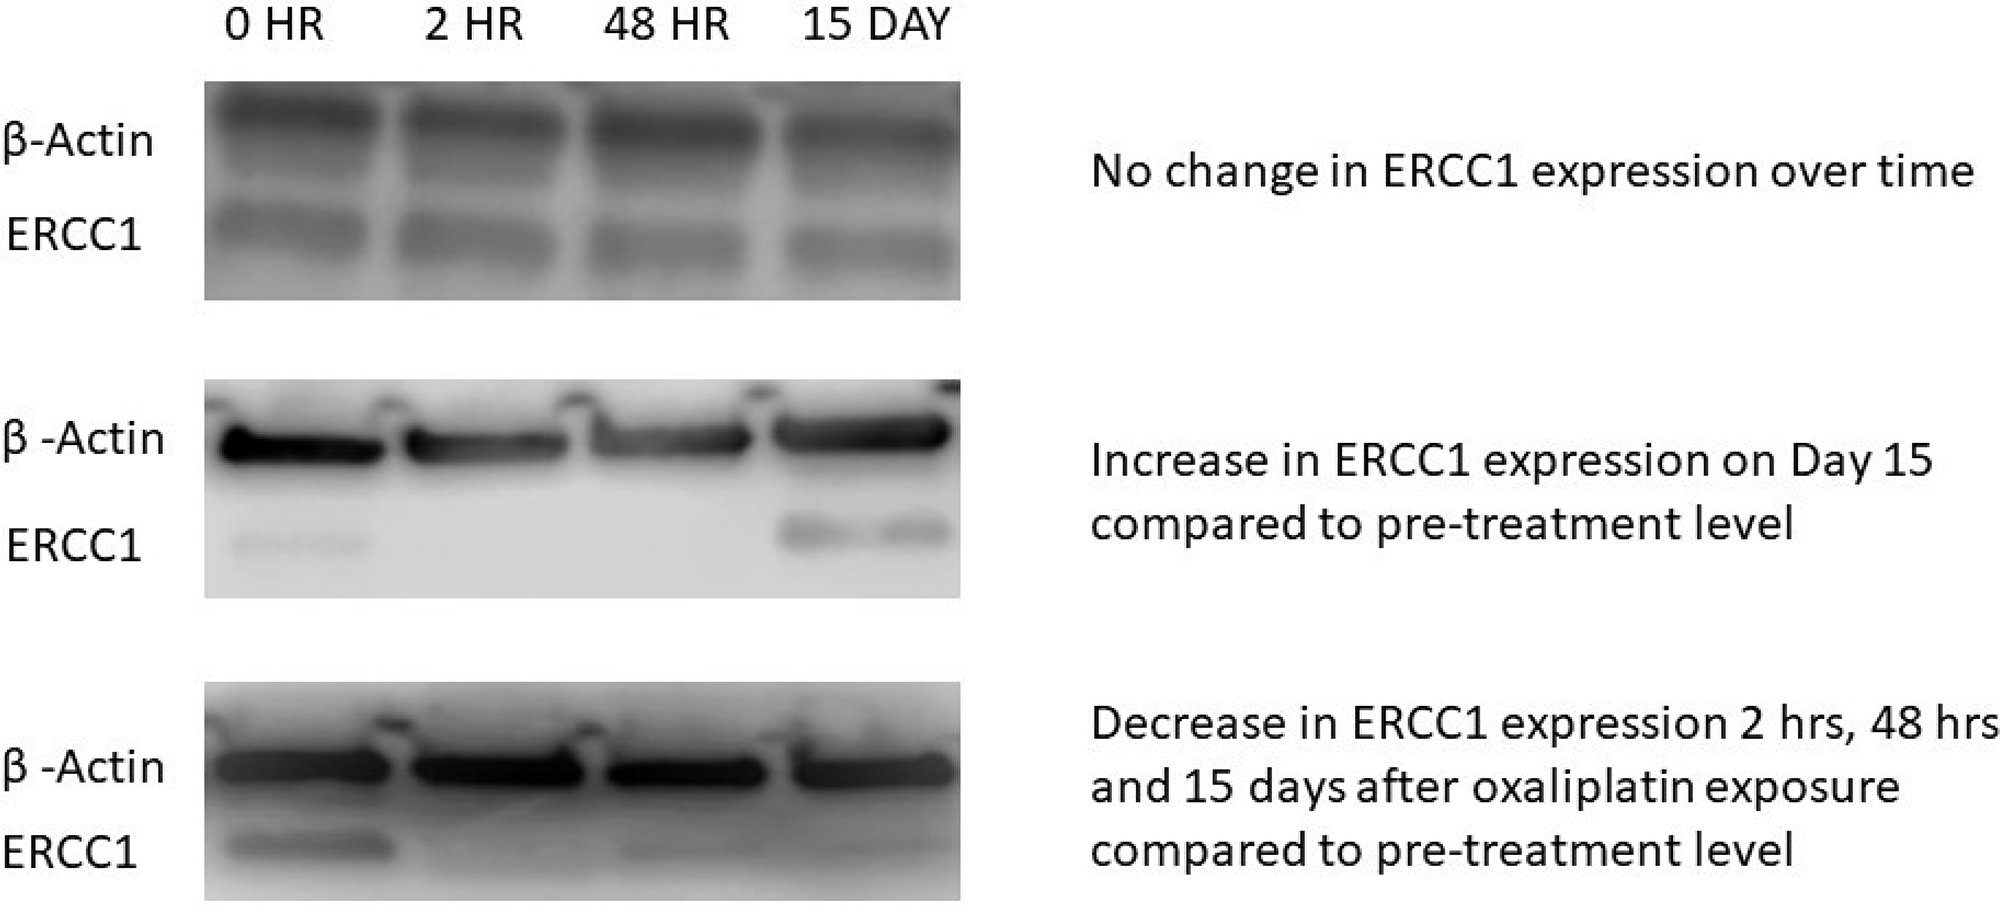 Western blot (WB) images from three representative patients.